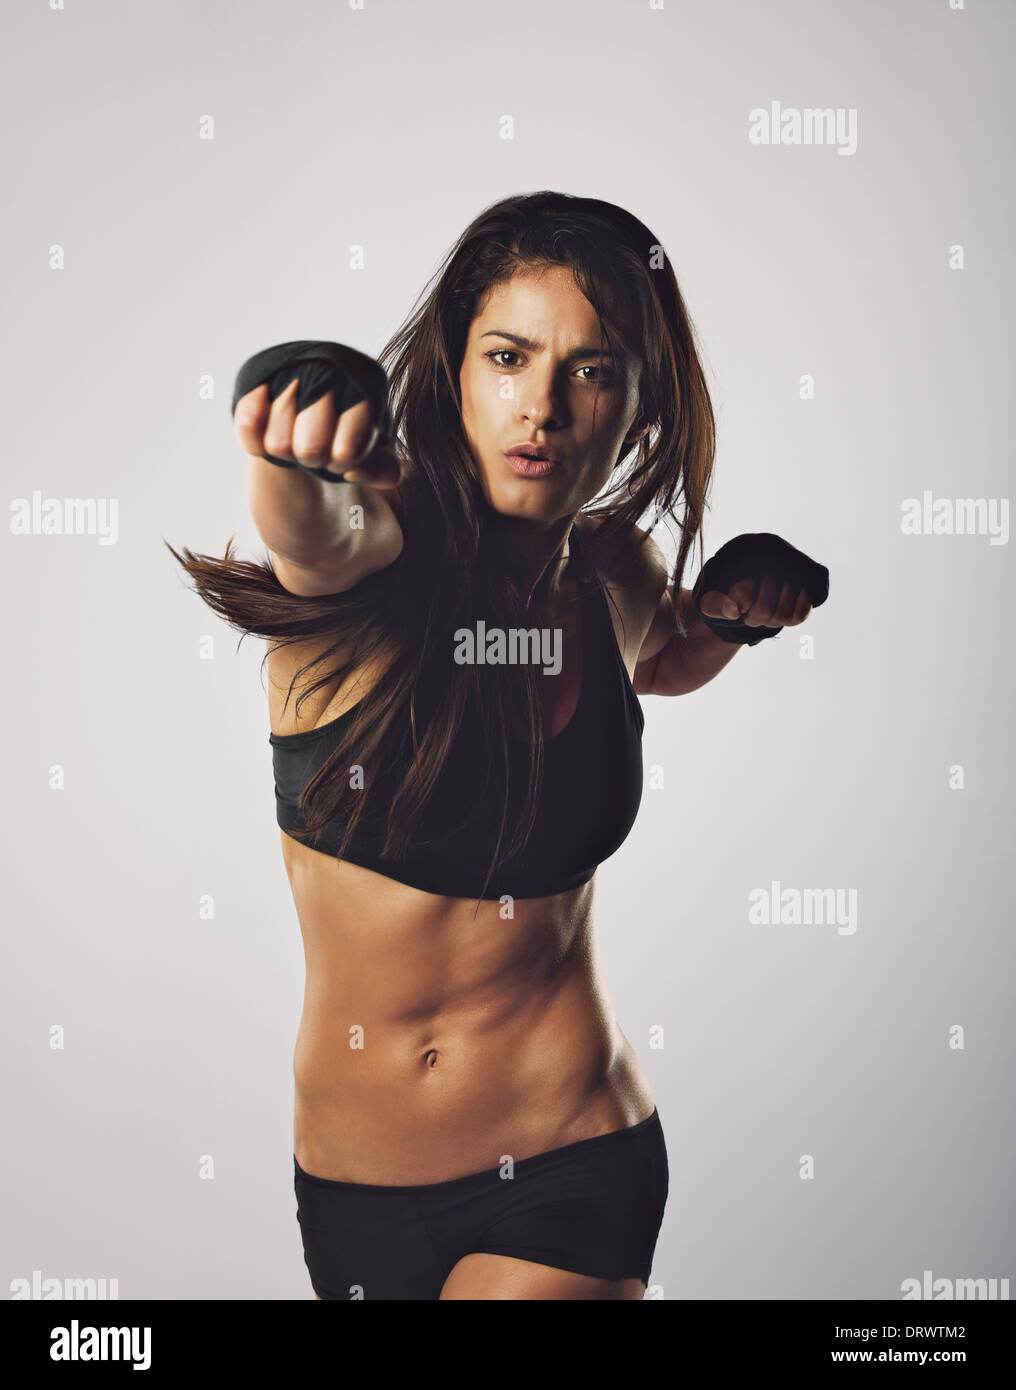 Young muscular woman practicing boxing. Middle eastern female throwing punch towards camera against grey background Stock Photo